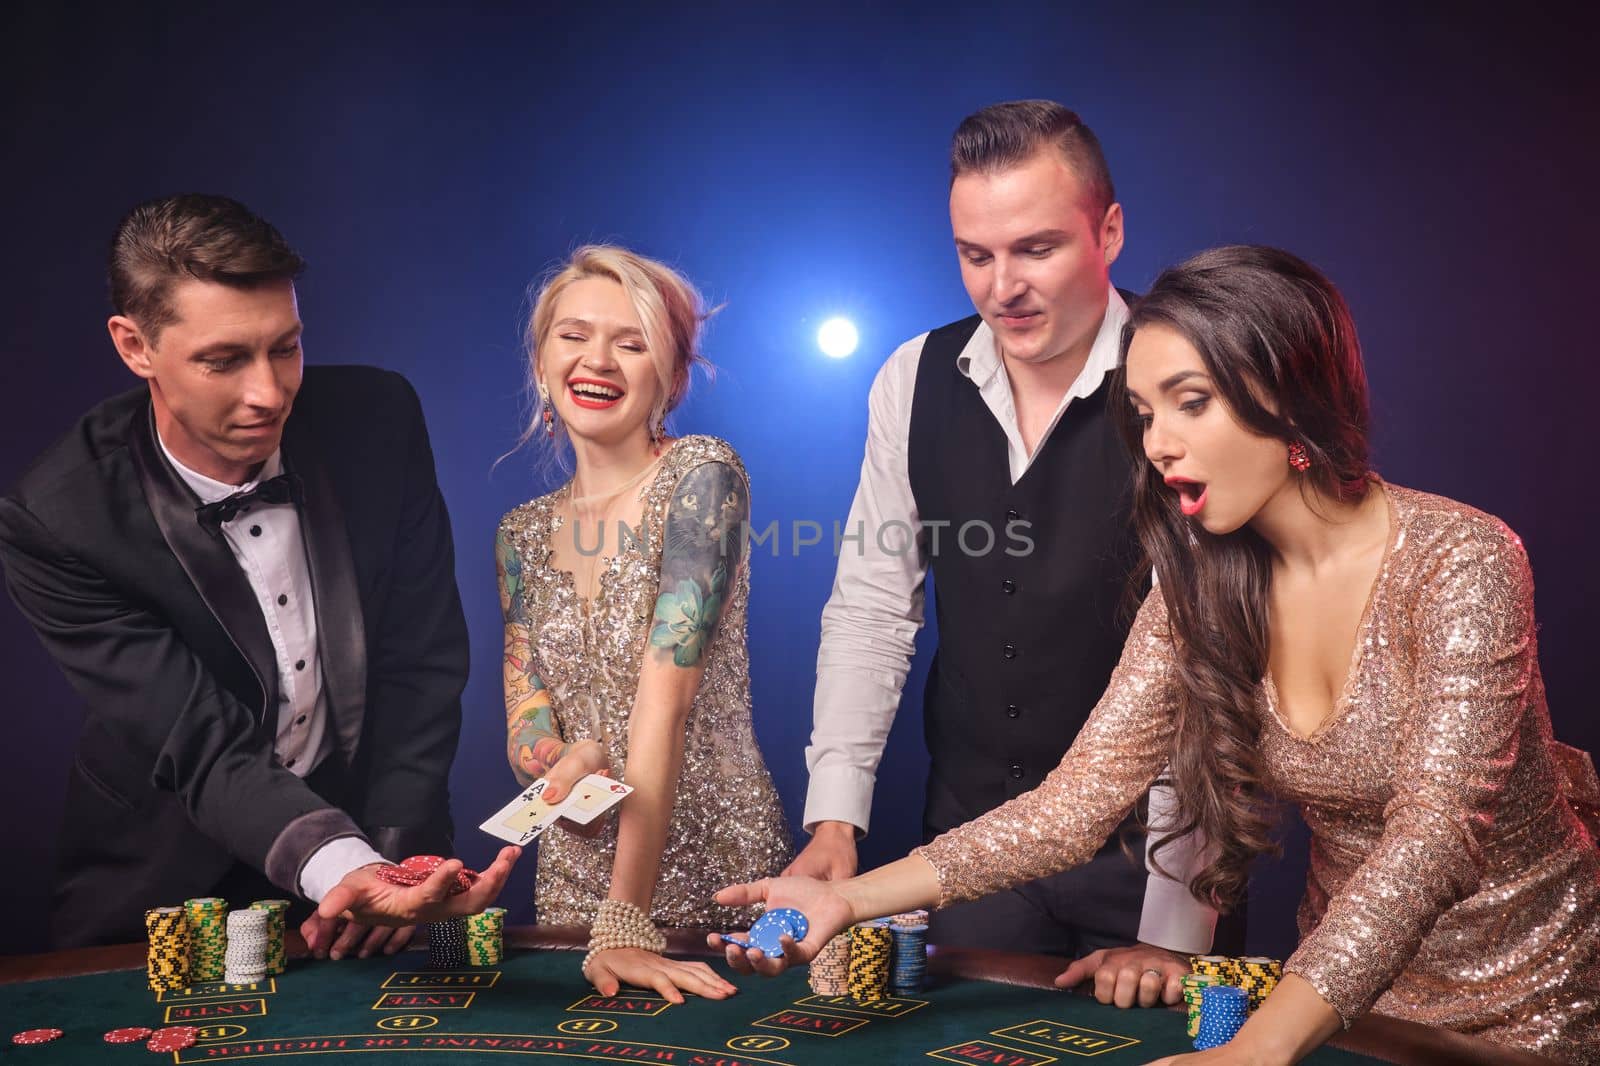 Group of a cheerful rich colleagues are playing poker at casino. Youth are making bets waiting for a big win. They are standing at the table against a red and blue backlights on black background. Risky gambling entertainment.